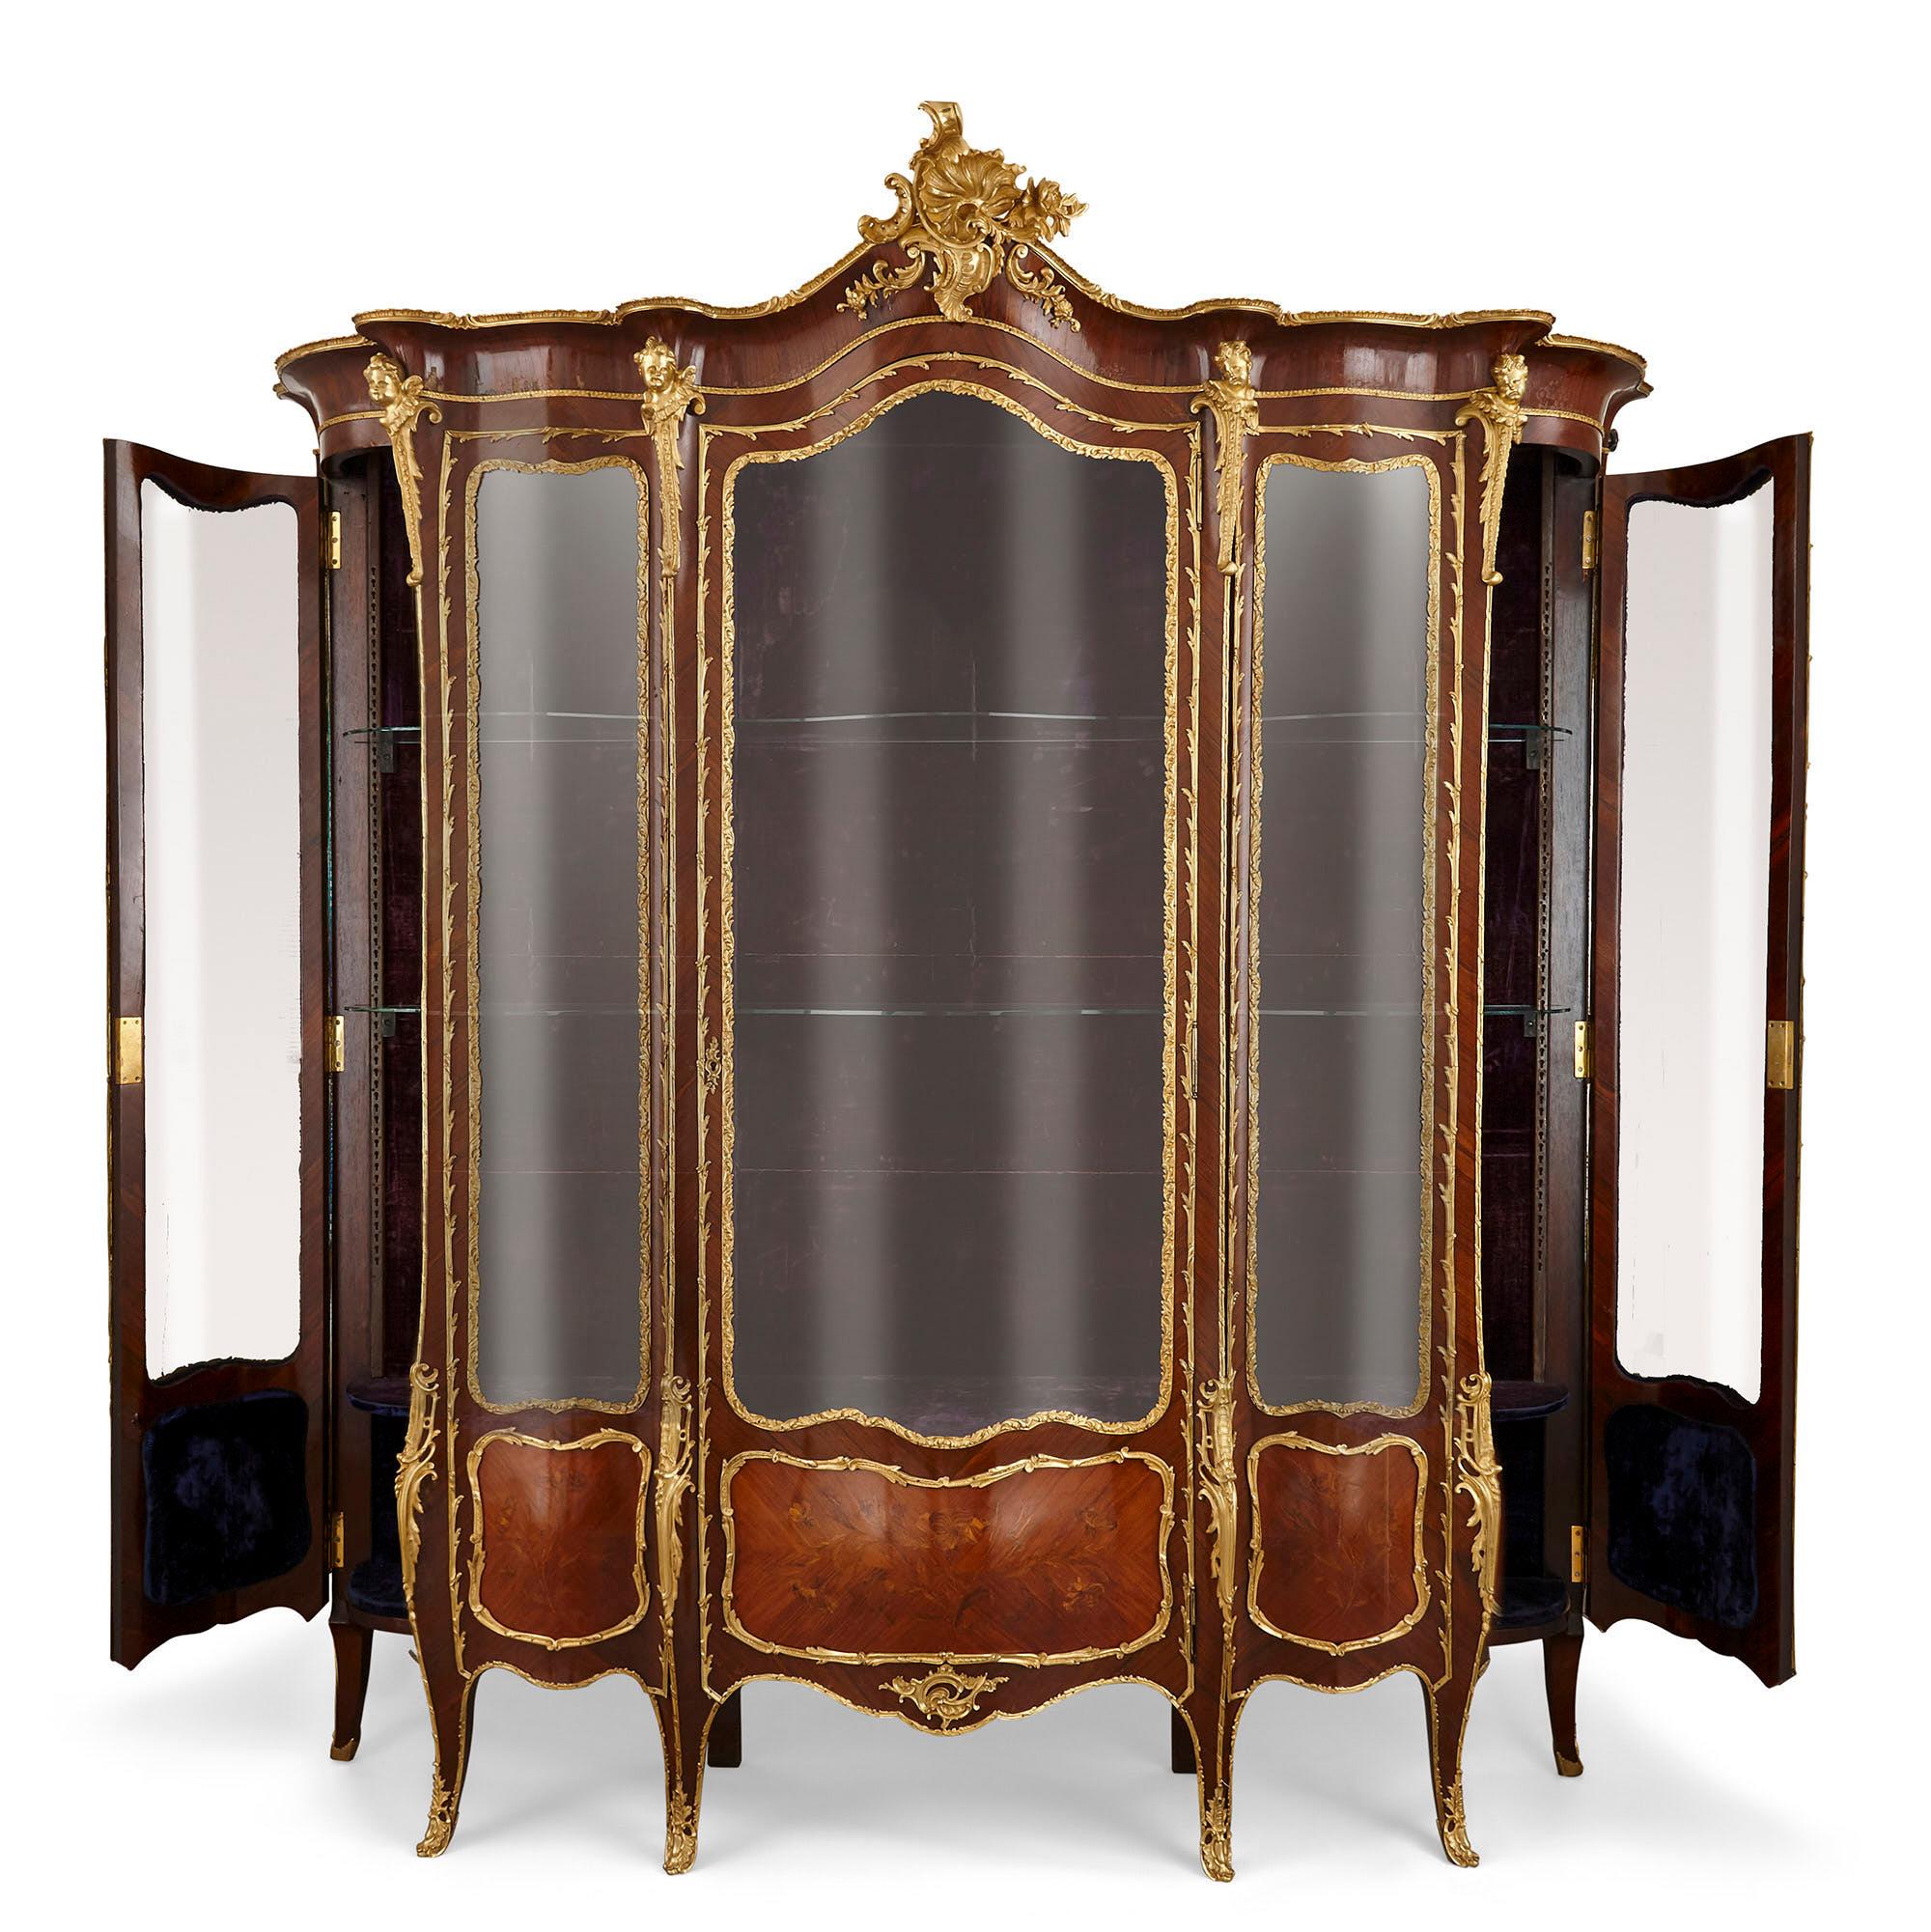 Large second Empire gilt bronze and marquetry display cabinet
French, late 19th Century
Measures: Height 271cm, width 235cm, depth 52cm

This magnificent display cabinet exemplifies the very best of the Second Empire style. The cabinet is